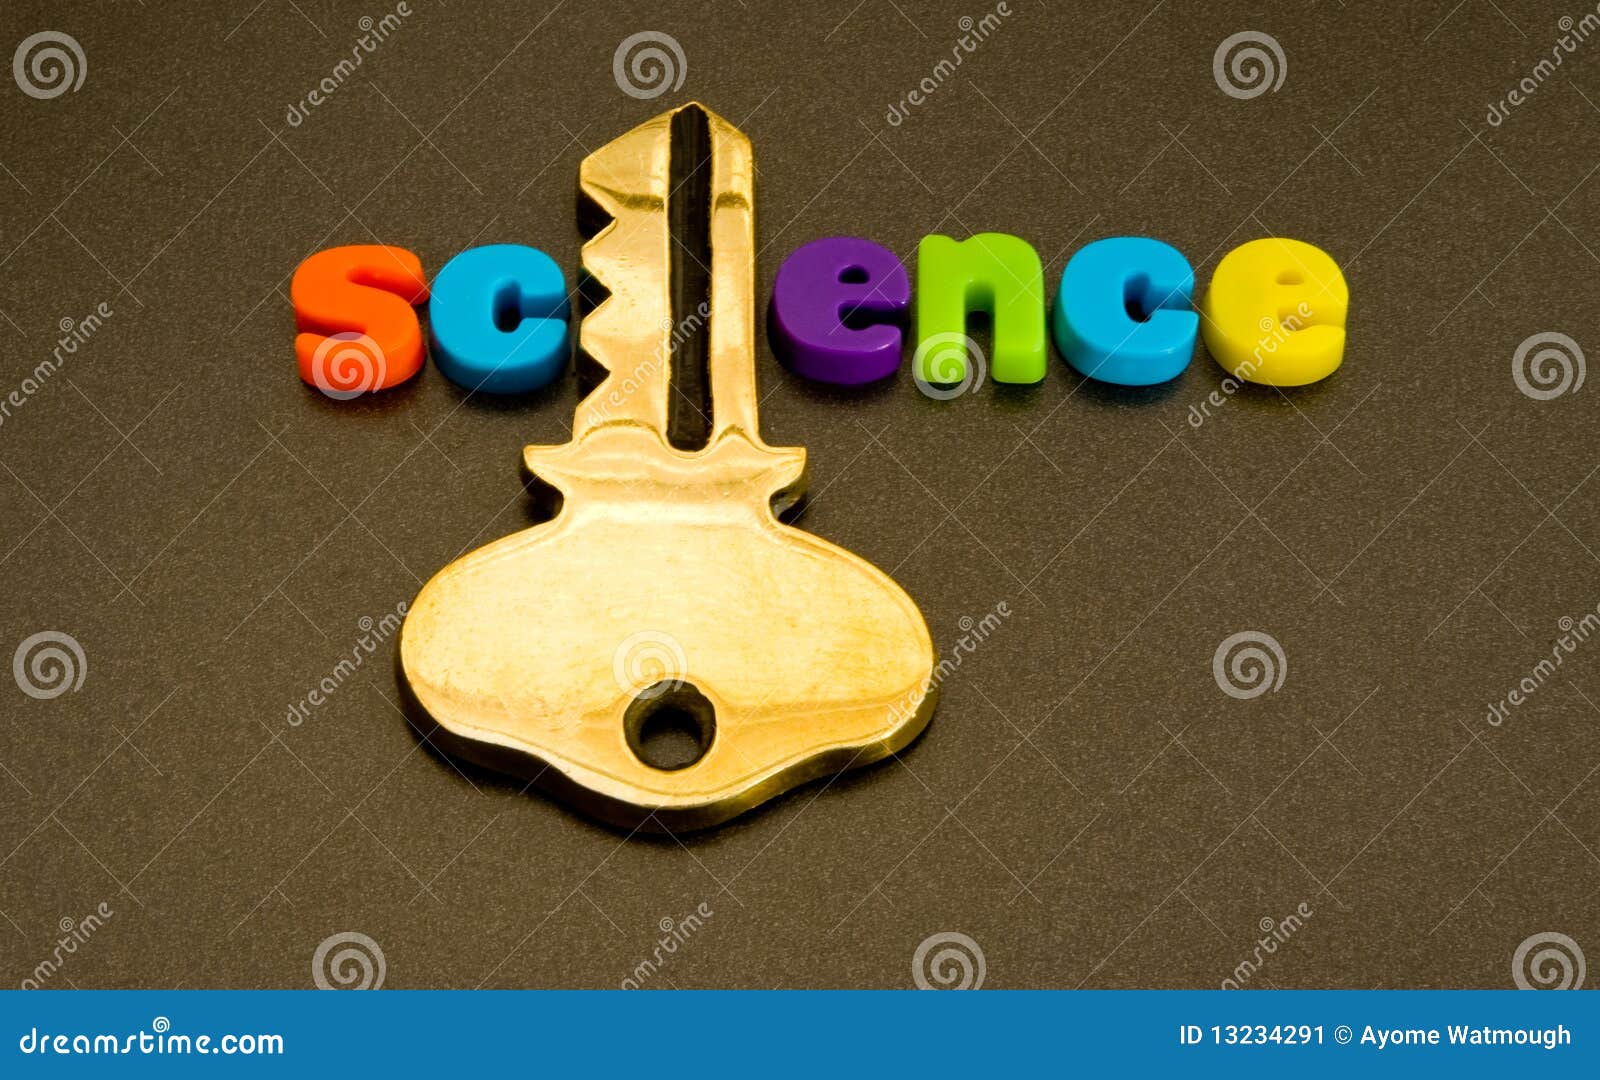 key to science.